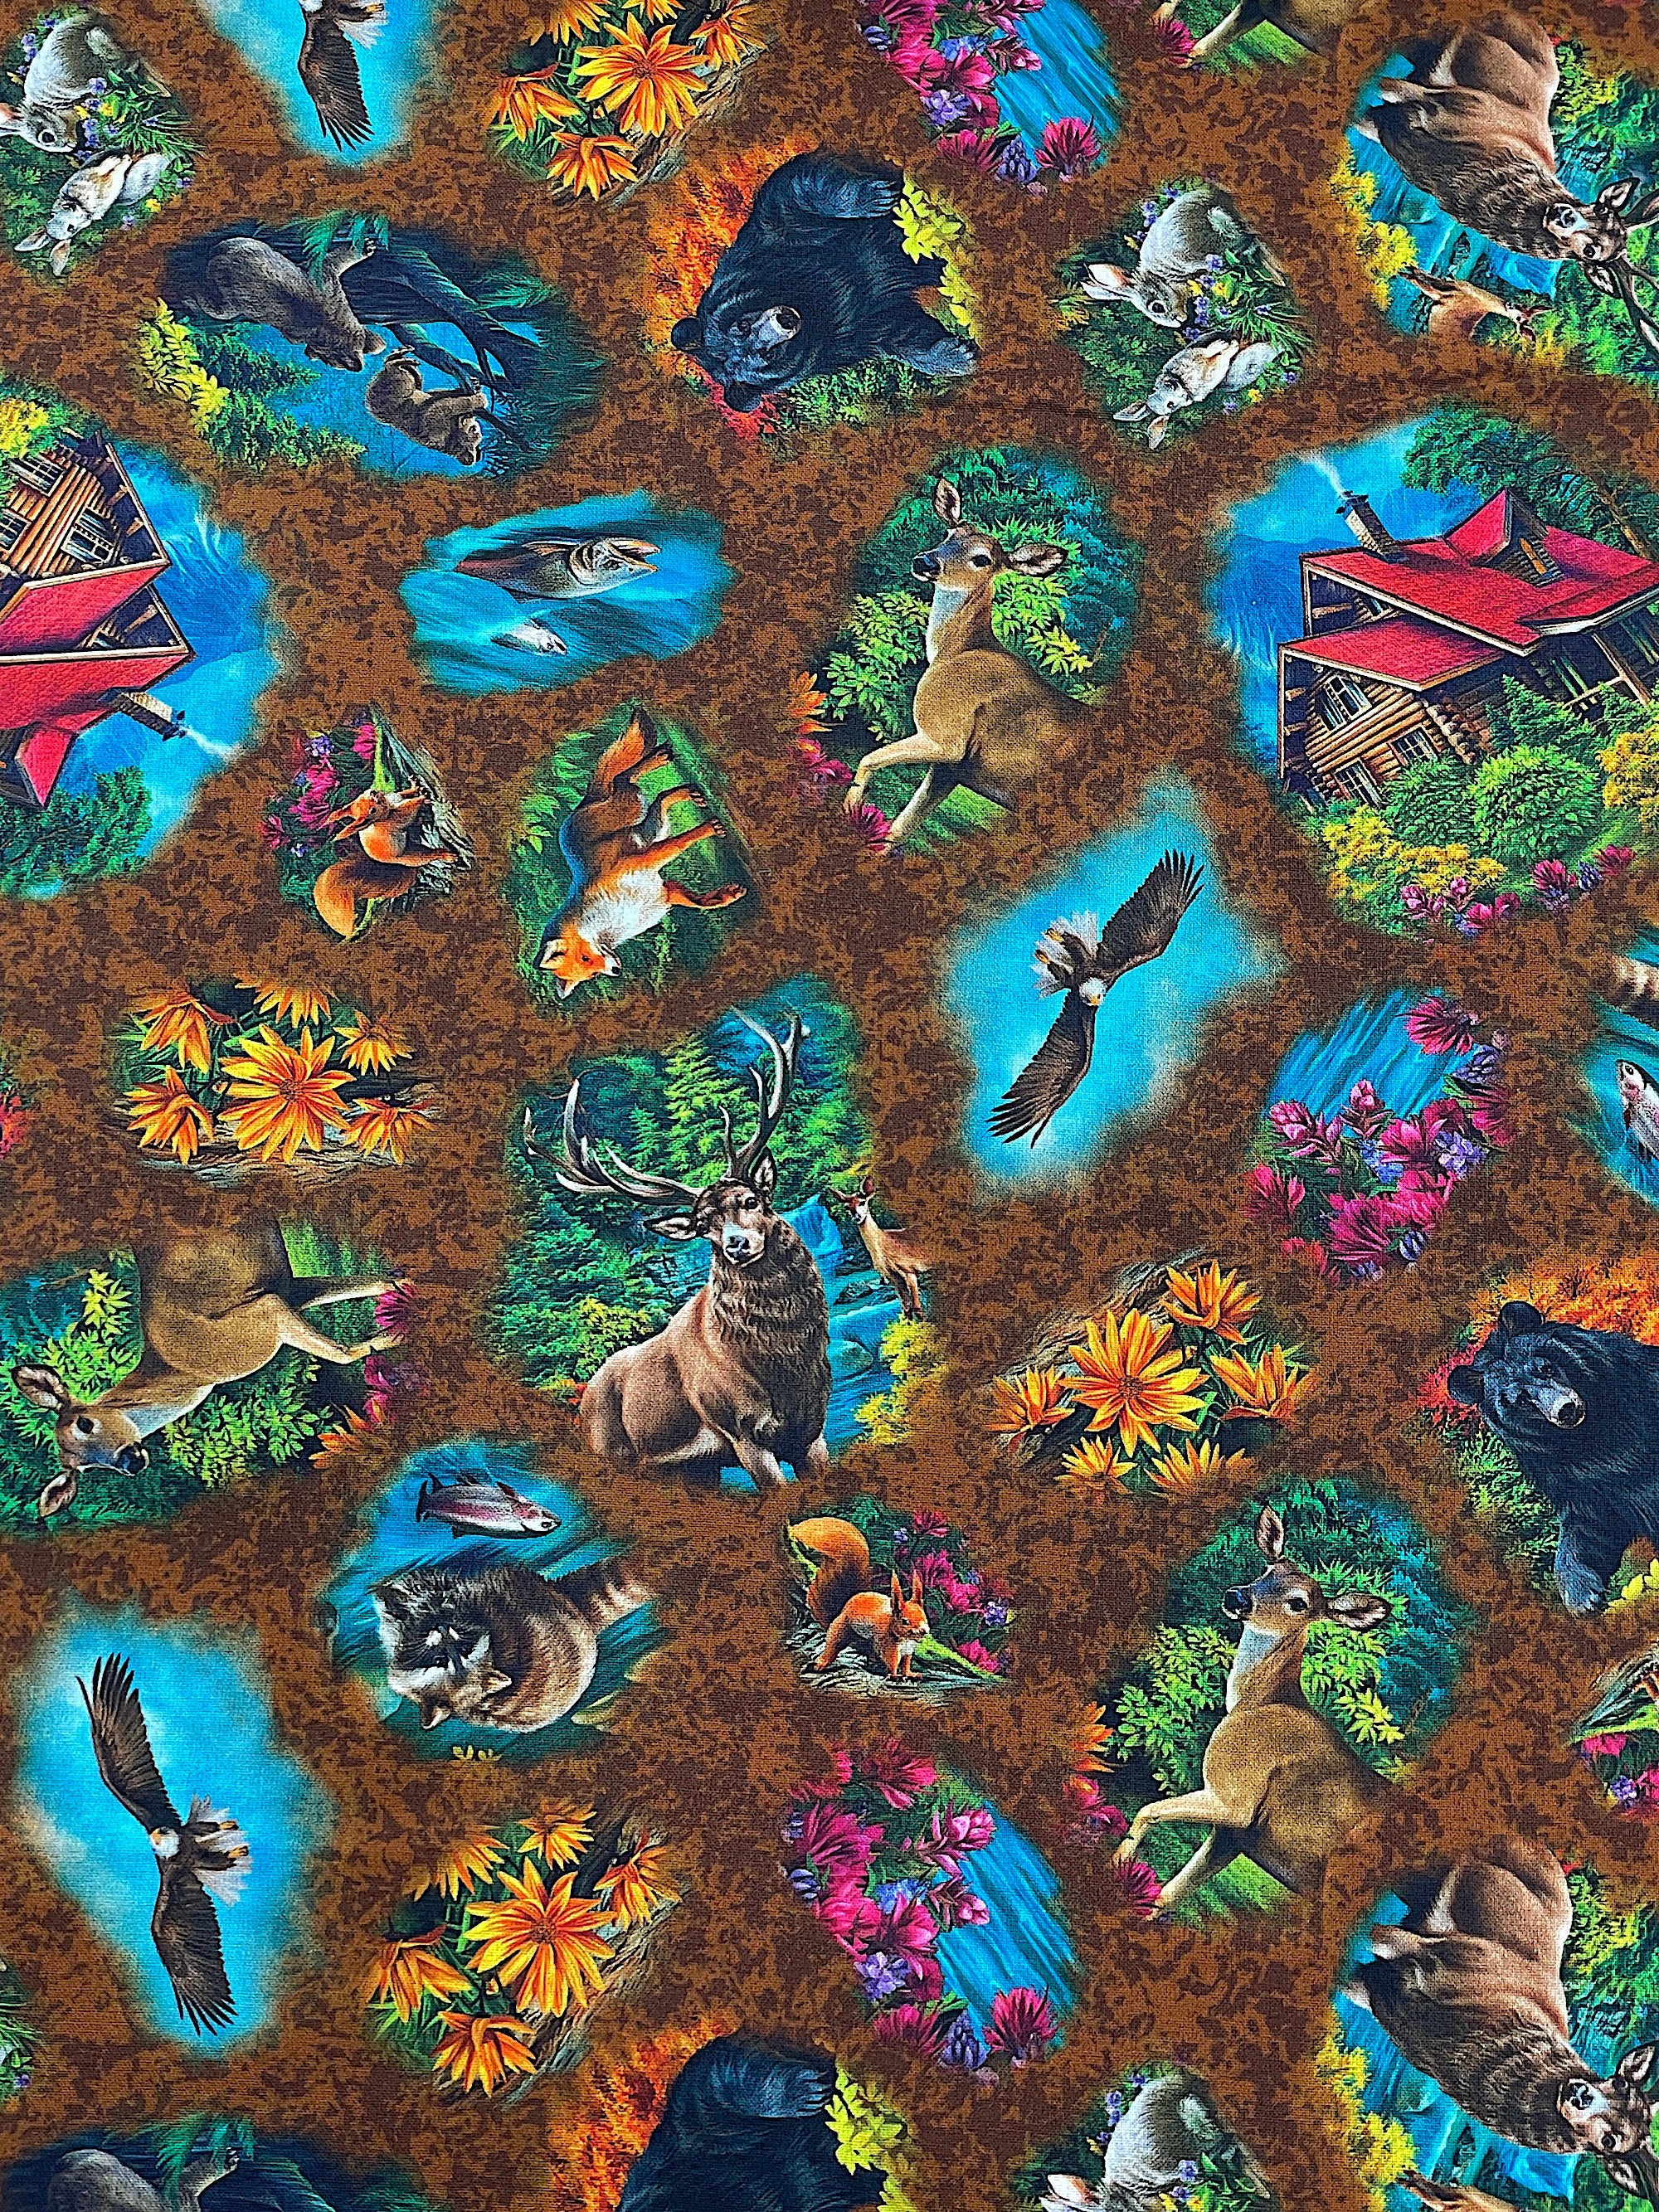 This fabric is called Brookside Lodge Animal Vignettes. This brown cotton fabric is covered with cabins, beer, deer, flowers, birds and more.